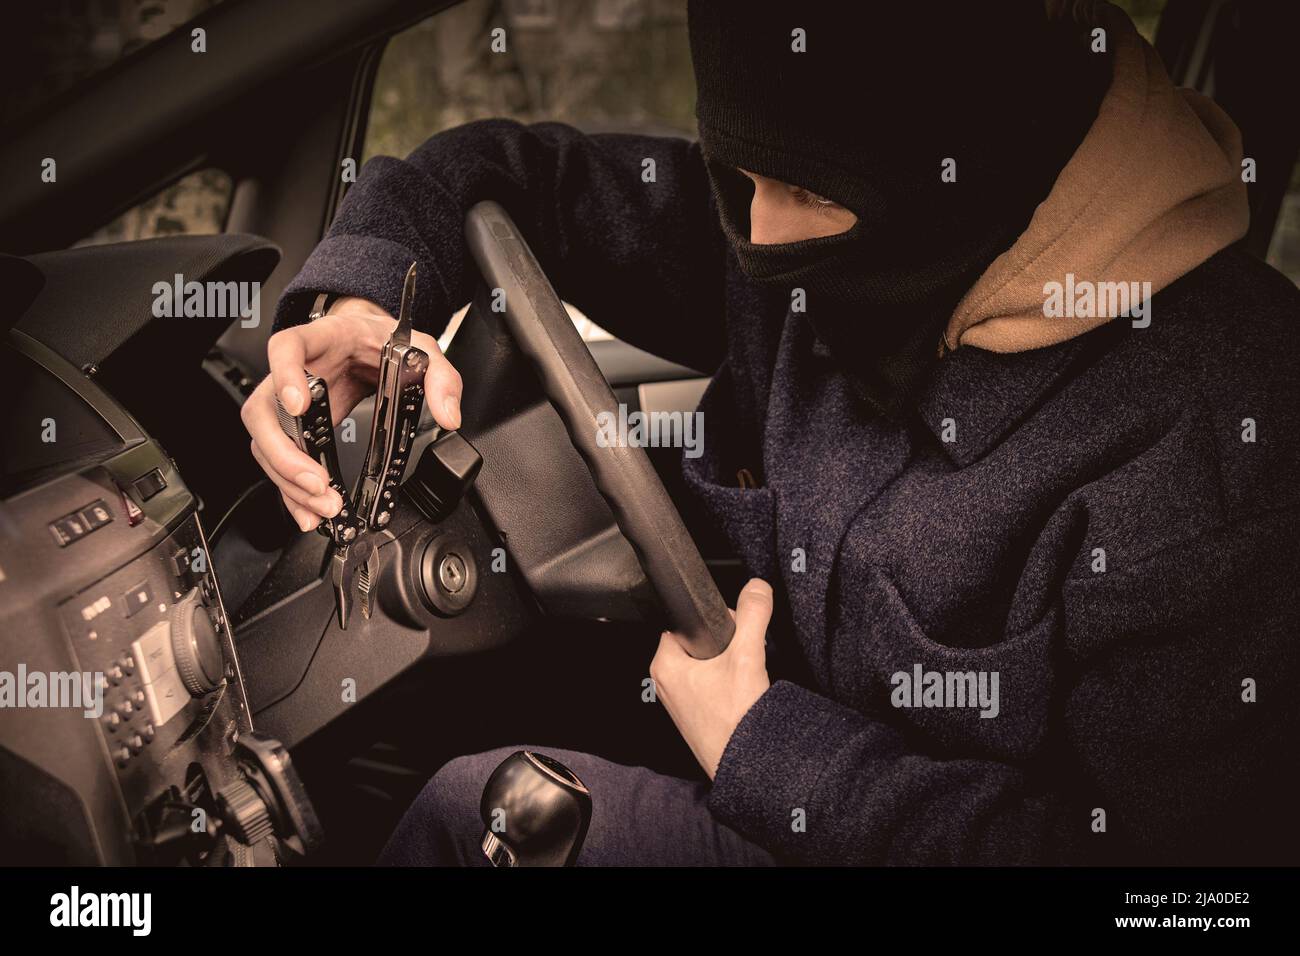 A car thief is trying to open the ignition lock with a tool. The car thief hid his face in a balaclava Stock Photo